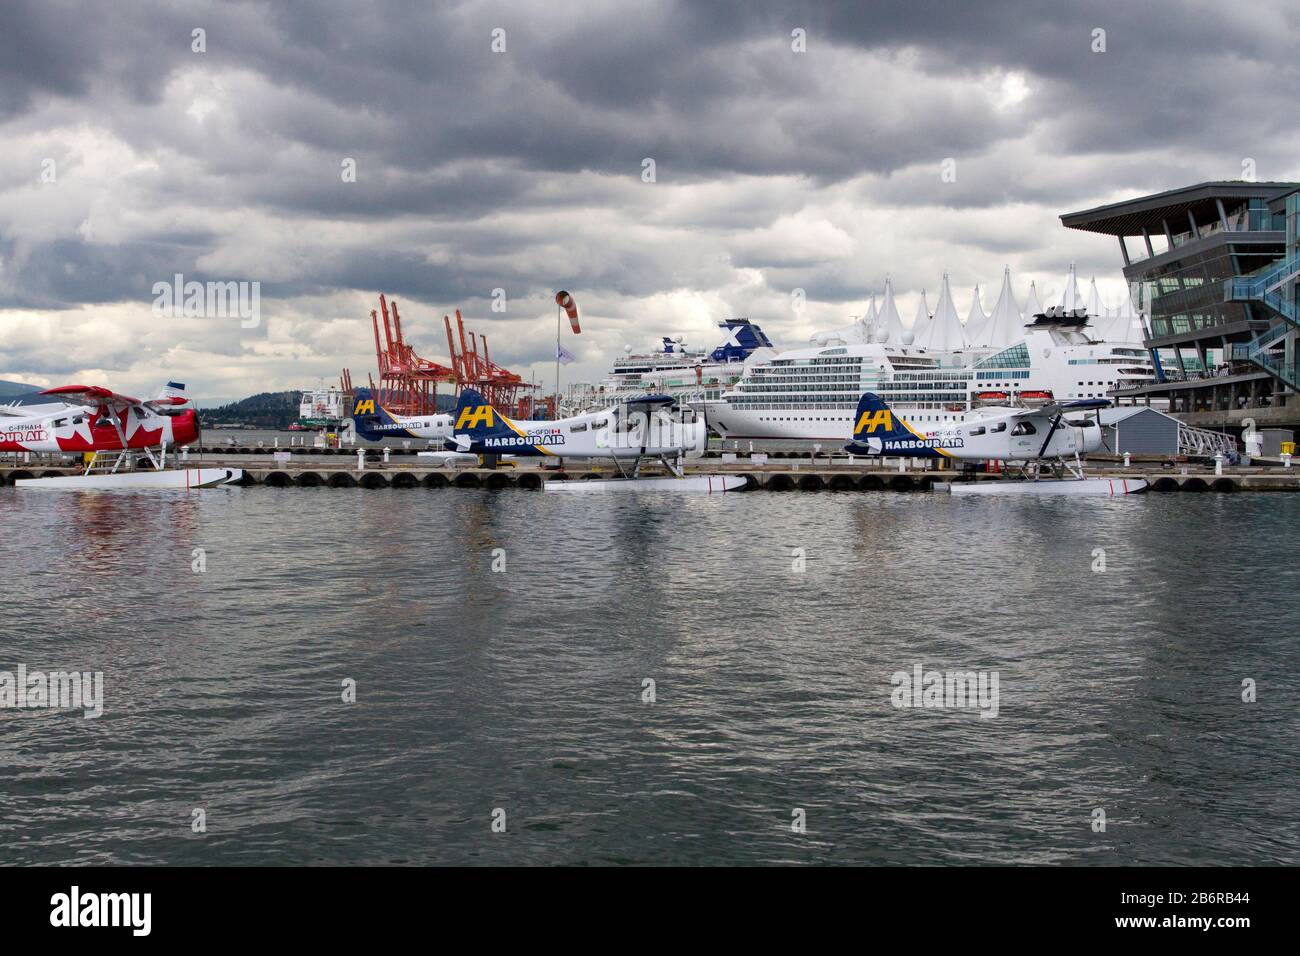 2 Harbour Air DHC-3 de Havilland Turbine Single Otter seaplanes at Coal Harbour, Vancouver, BC, Canada with gantry cranes & Canada Place in background Stock Photo